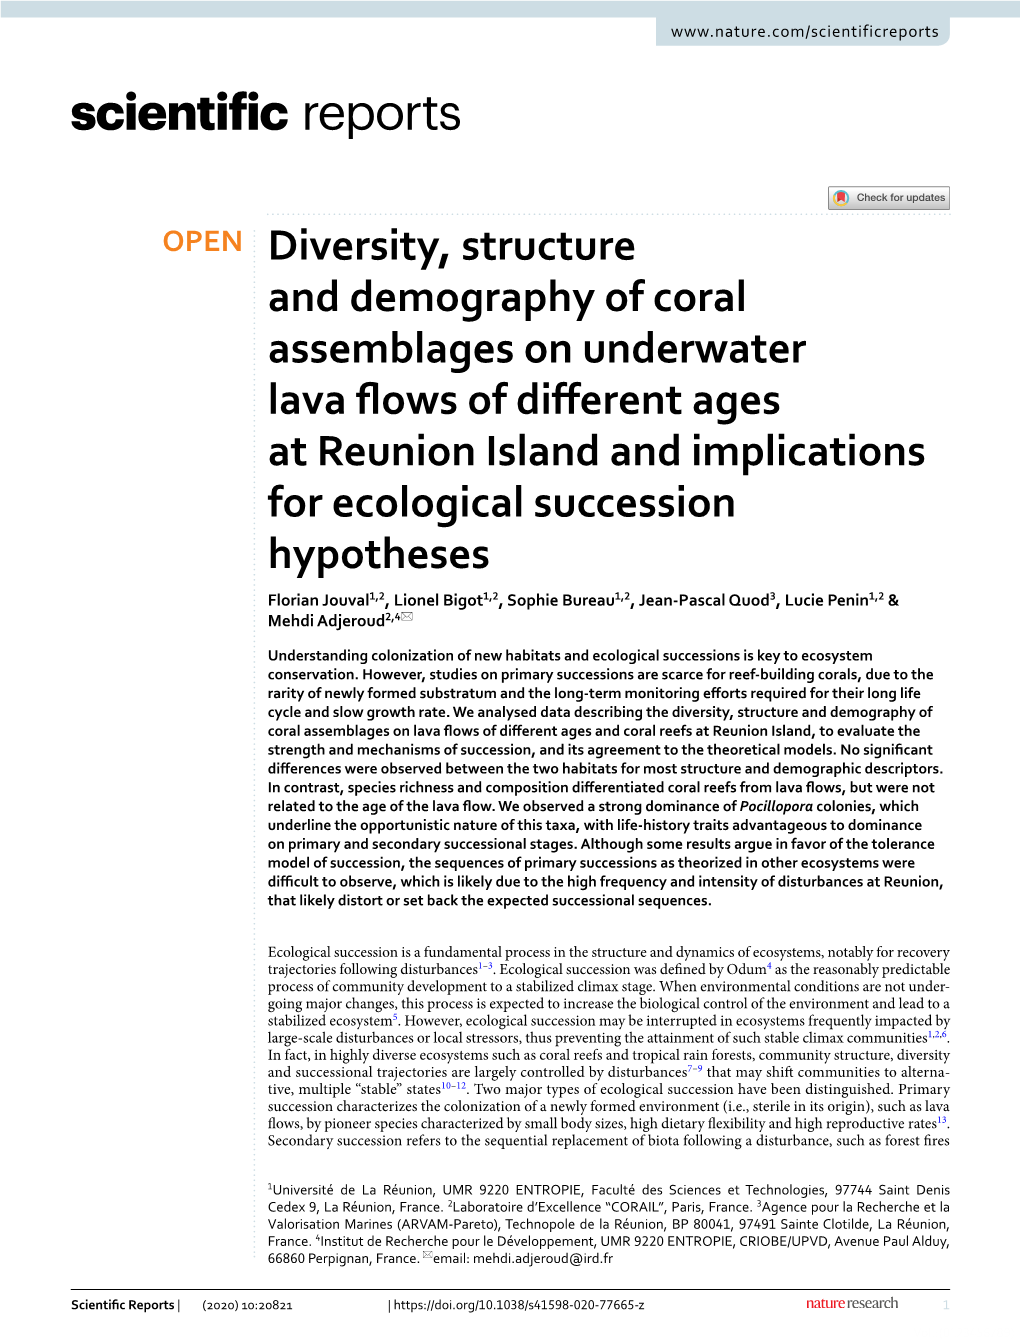 Diversity, Structure and Demography of Coral Assemblages on Underwater